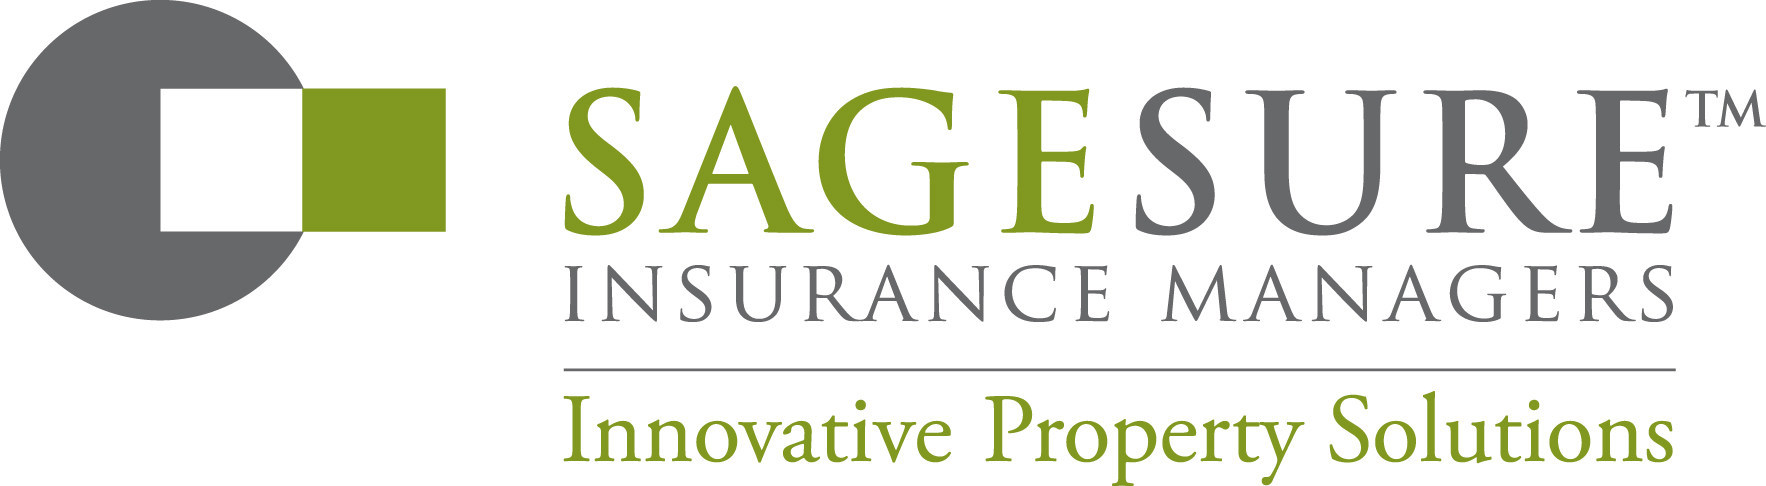 Sagesure Insurance Managers Expands Operations Opens Office In Cincinnati